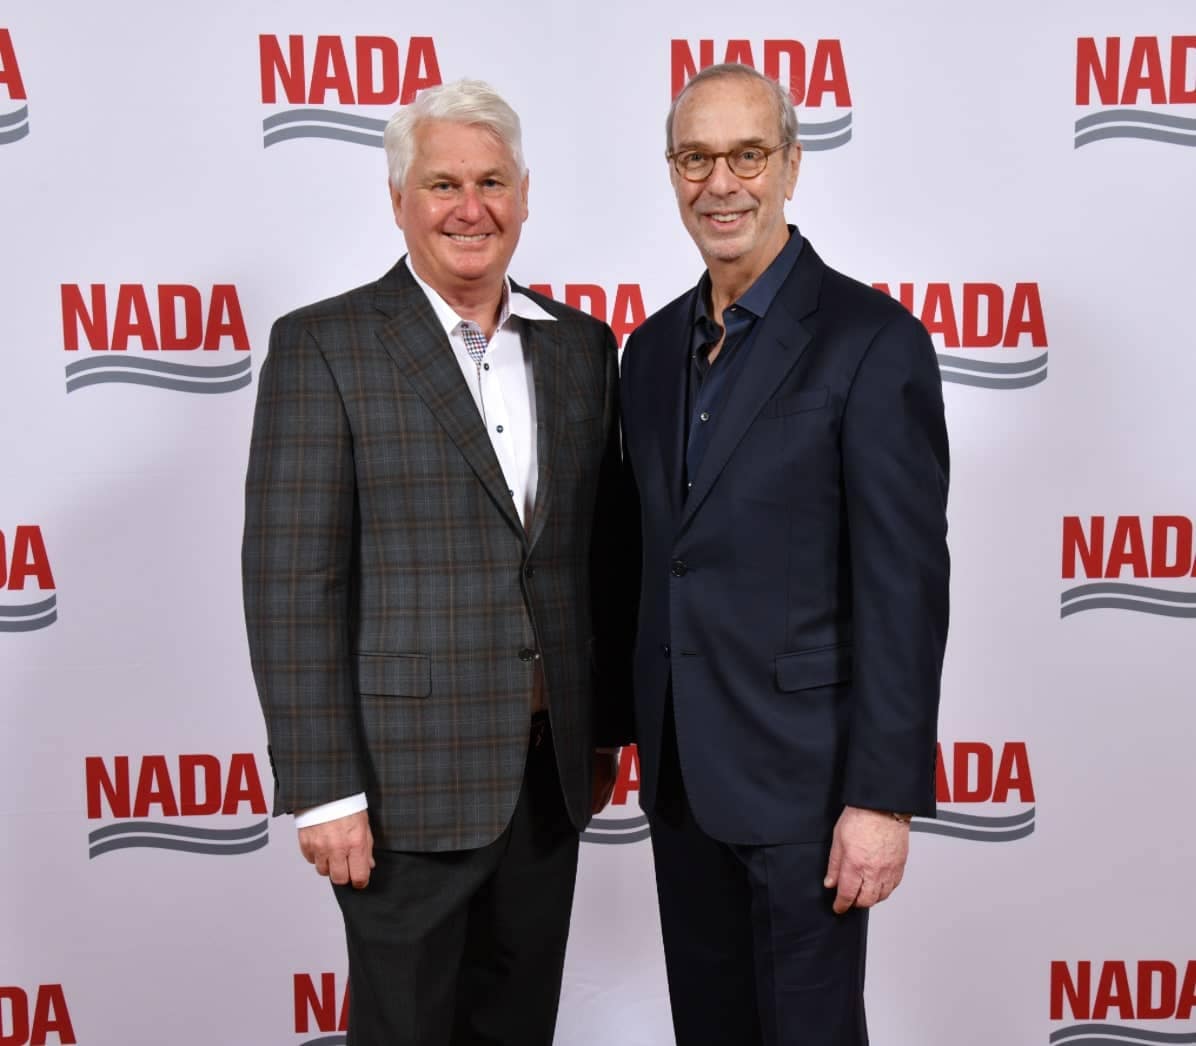 John Billard (left) was nominated for the TIME Dealer of the Year award